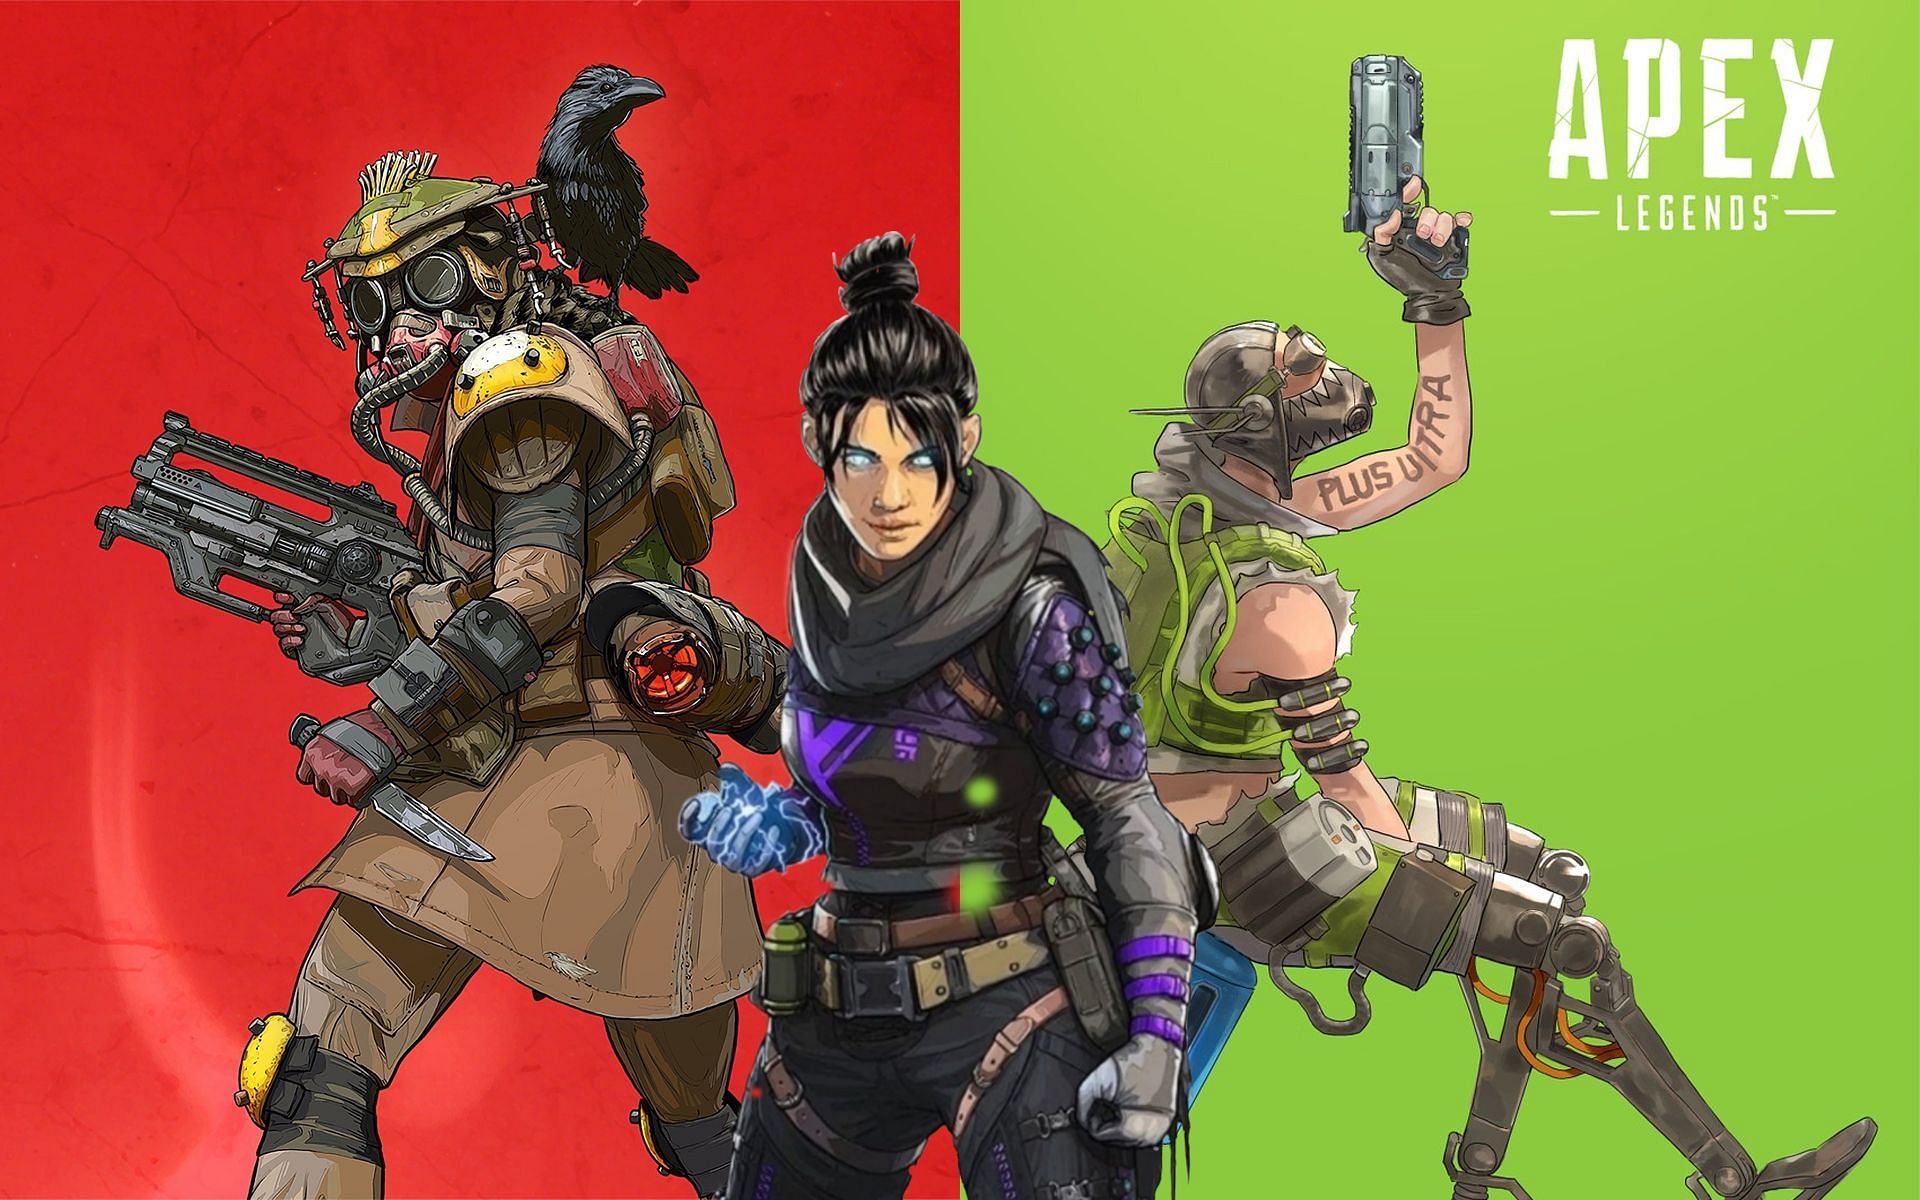 What makes the trio undefeated in Apex Legends in terms of pick rates? (Image by Sportskeeda/Resapwn)